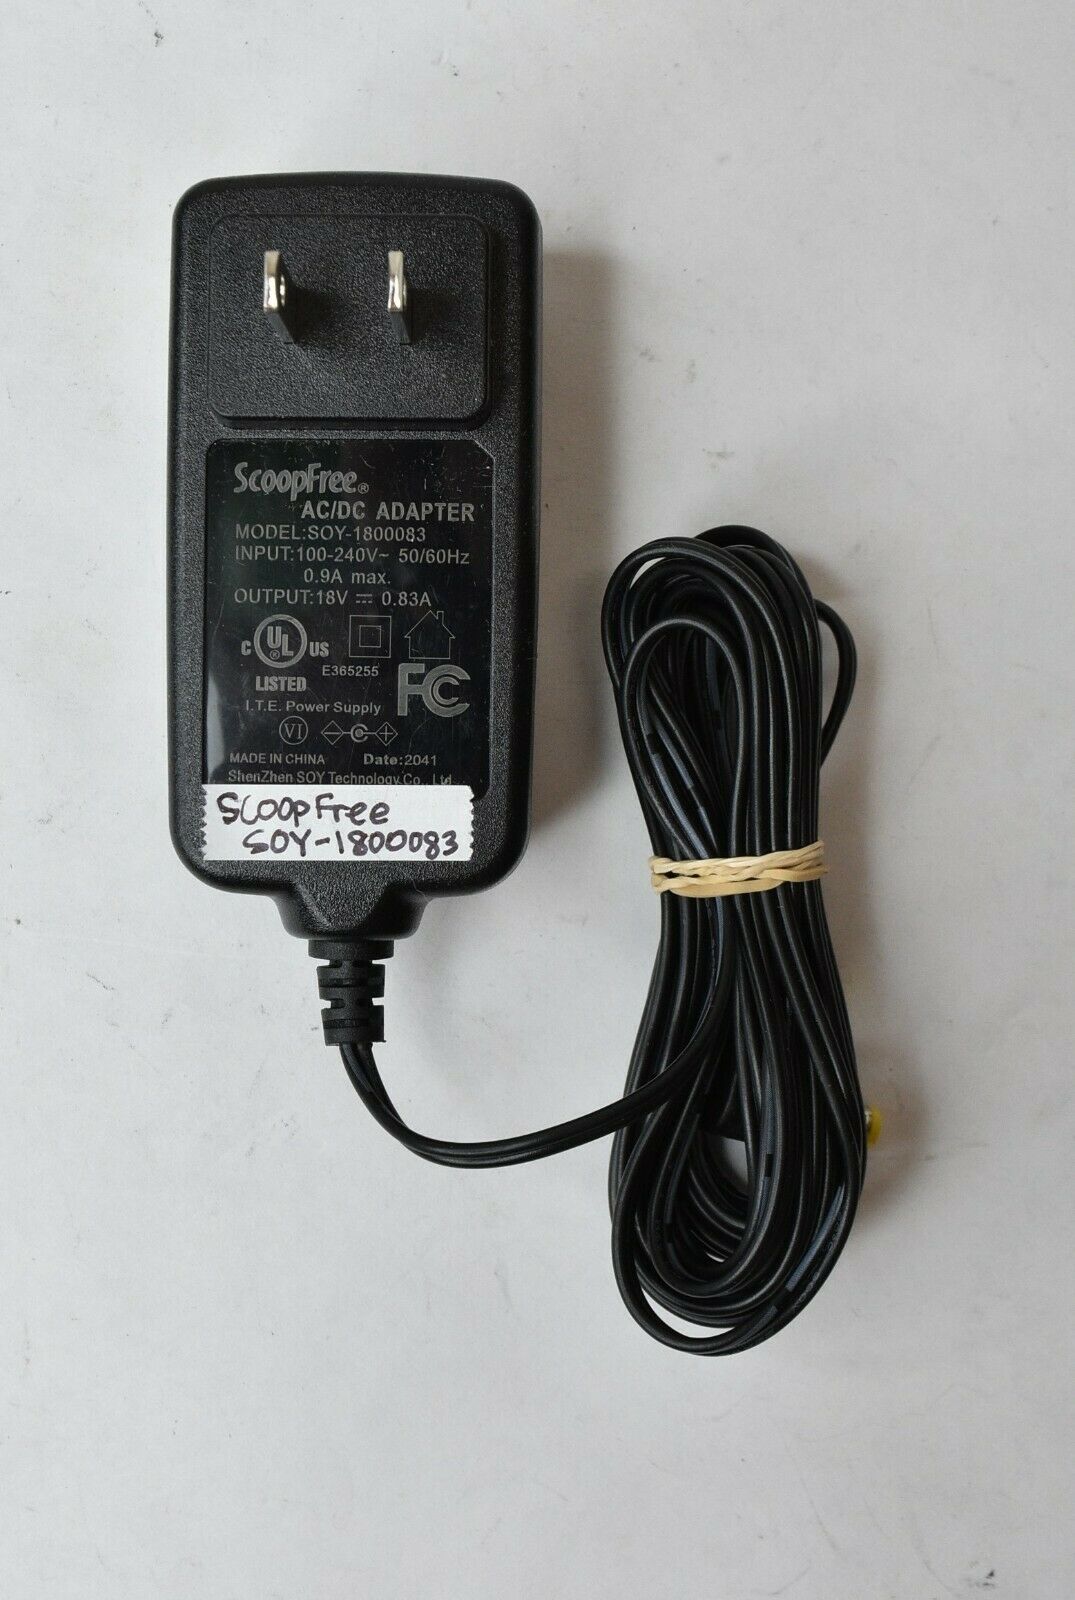 ScoopFree AC/DC Adapter Power Supply Unit SOY-280003 28V 0.83A Type: AC/DC Adapter Output Voltage: 28 V Brand: Sc